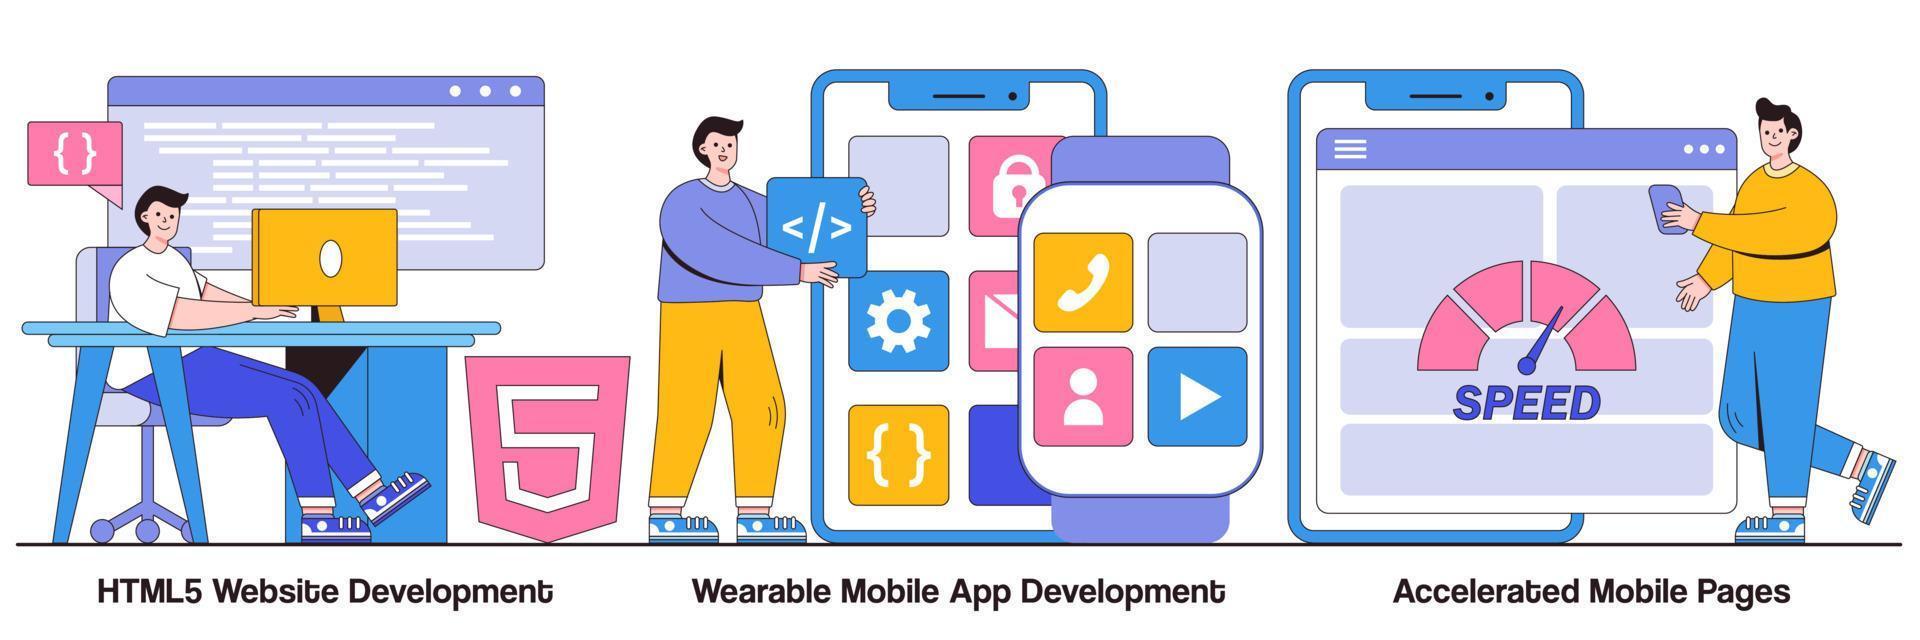 HTML5 Website Development, Wearable Mobile App, and Accelerated Pages Illustrated Pack vector